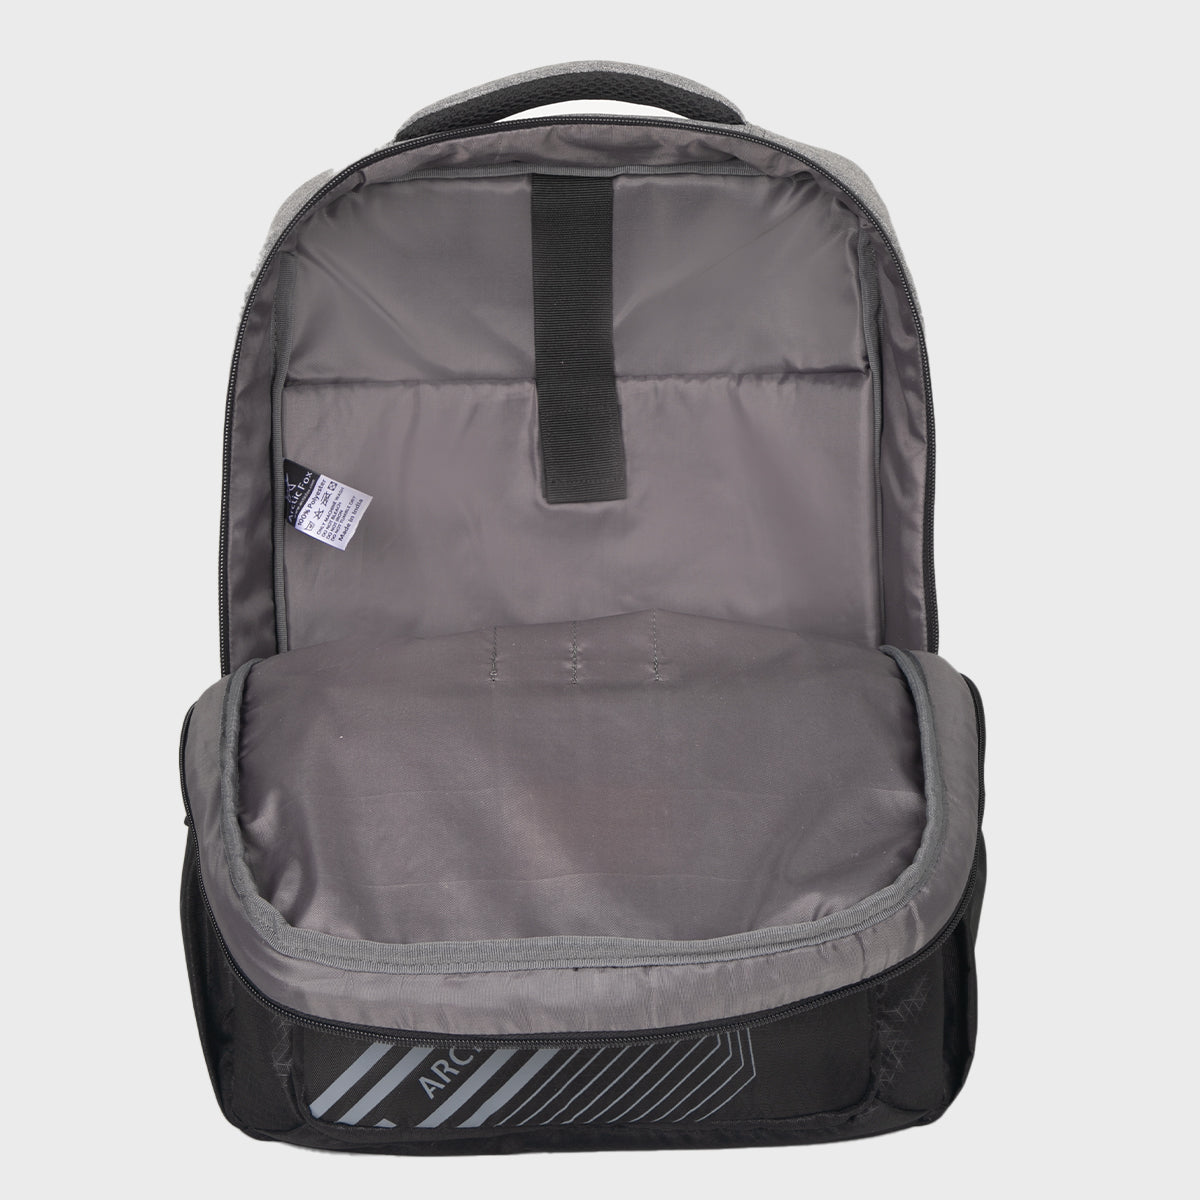 Laptop Bags, Cases, Covers & Backpacks | KNOMO London UK